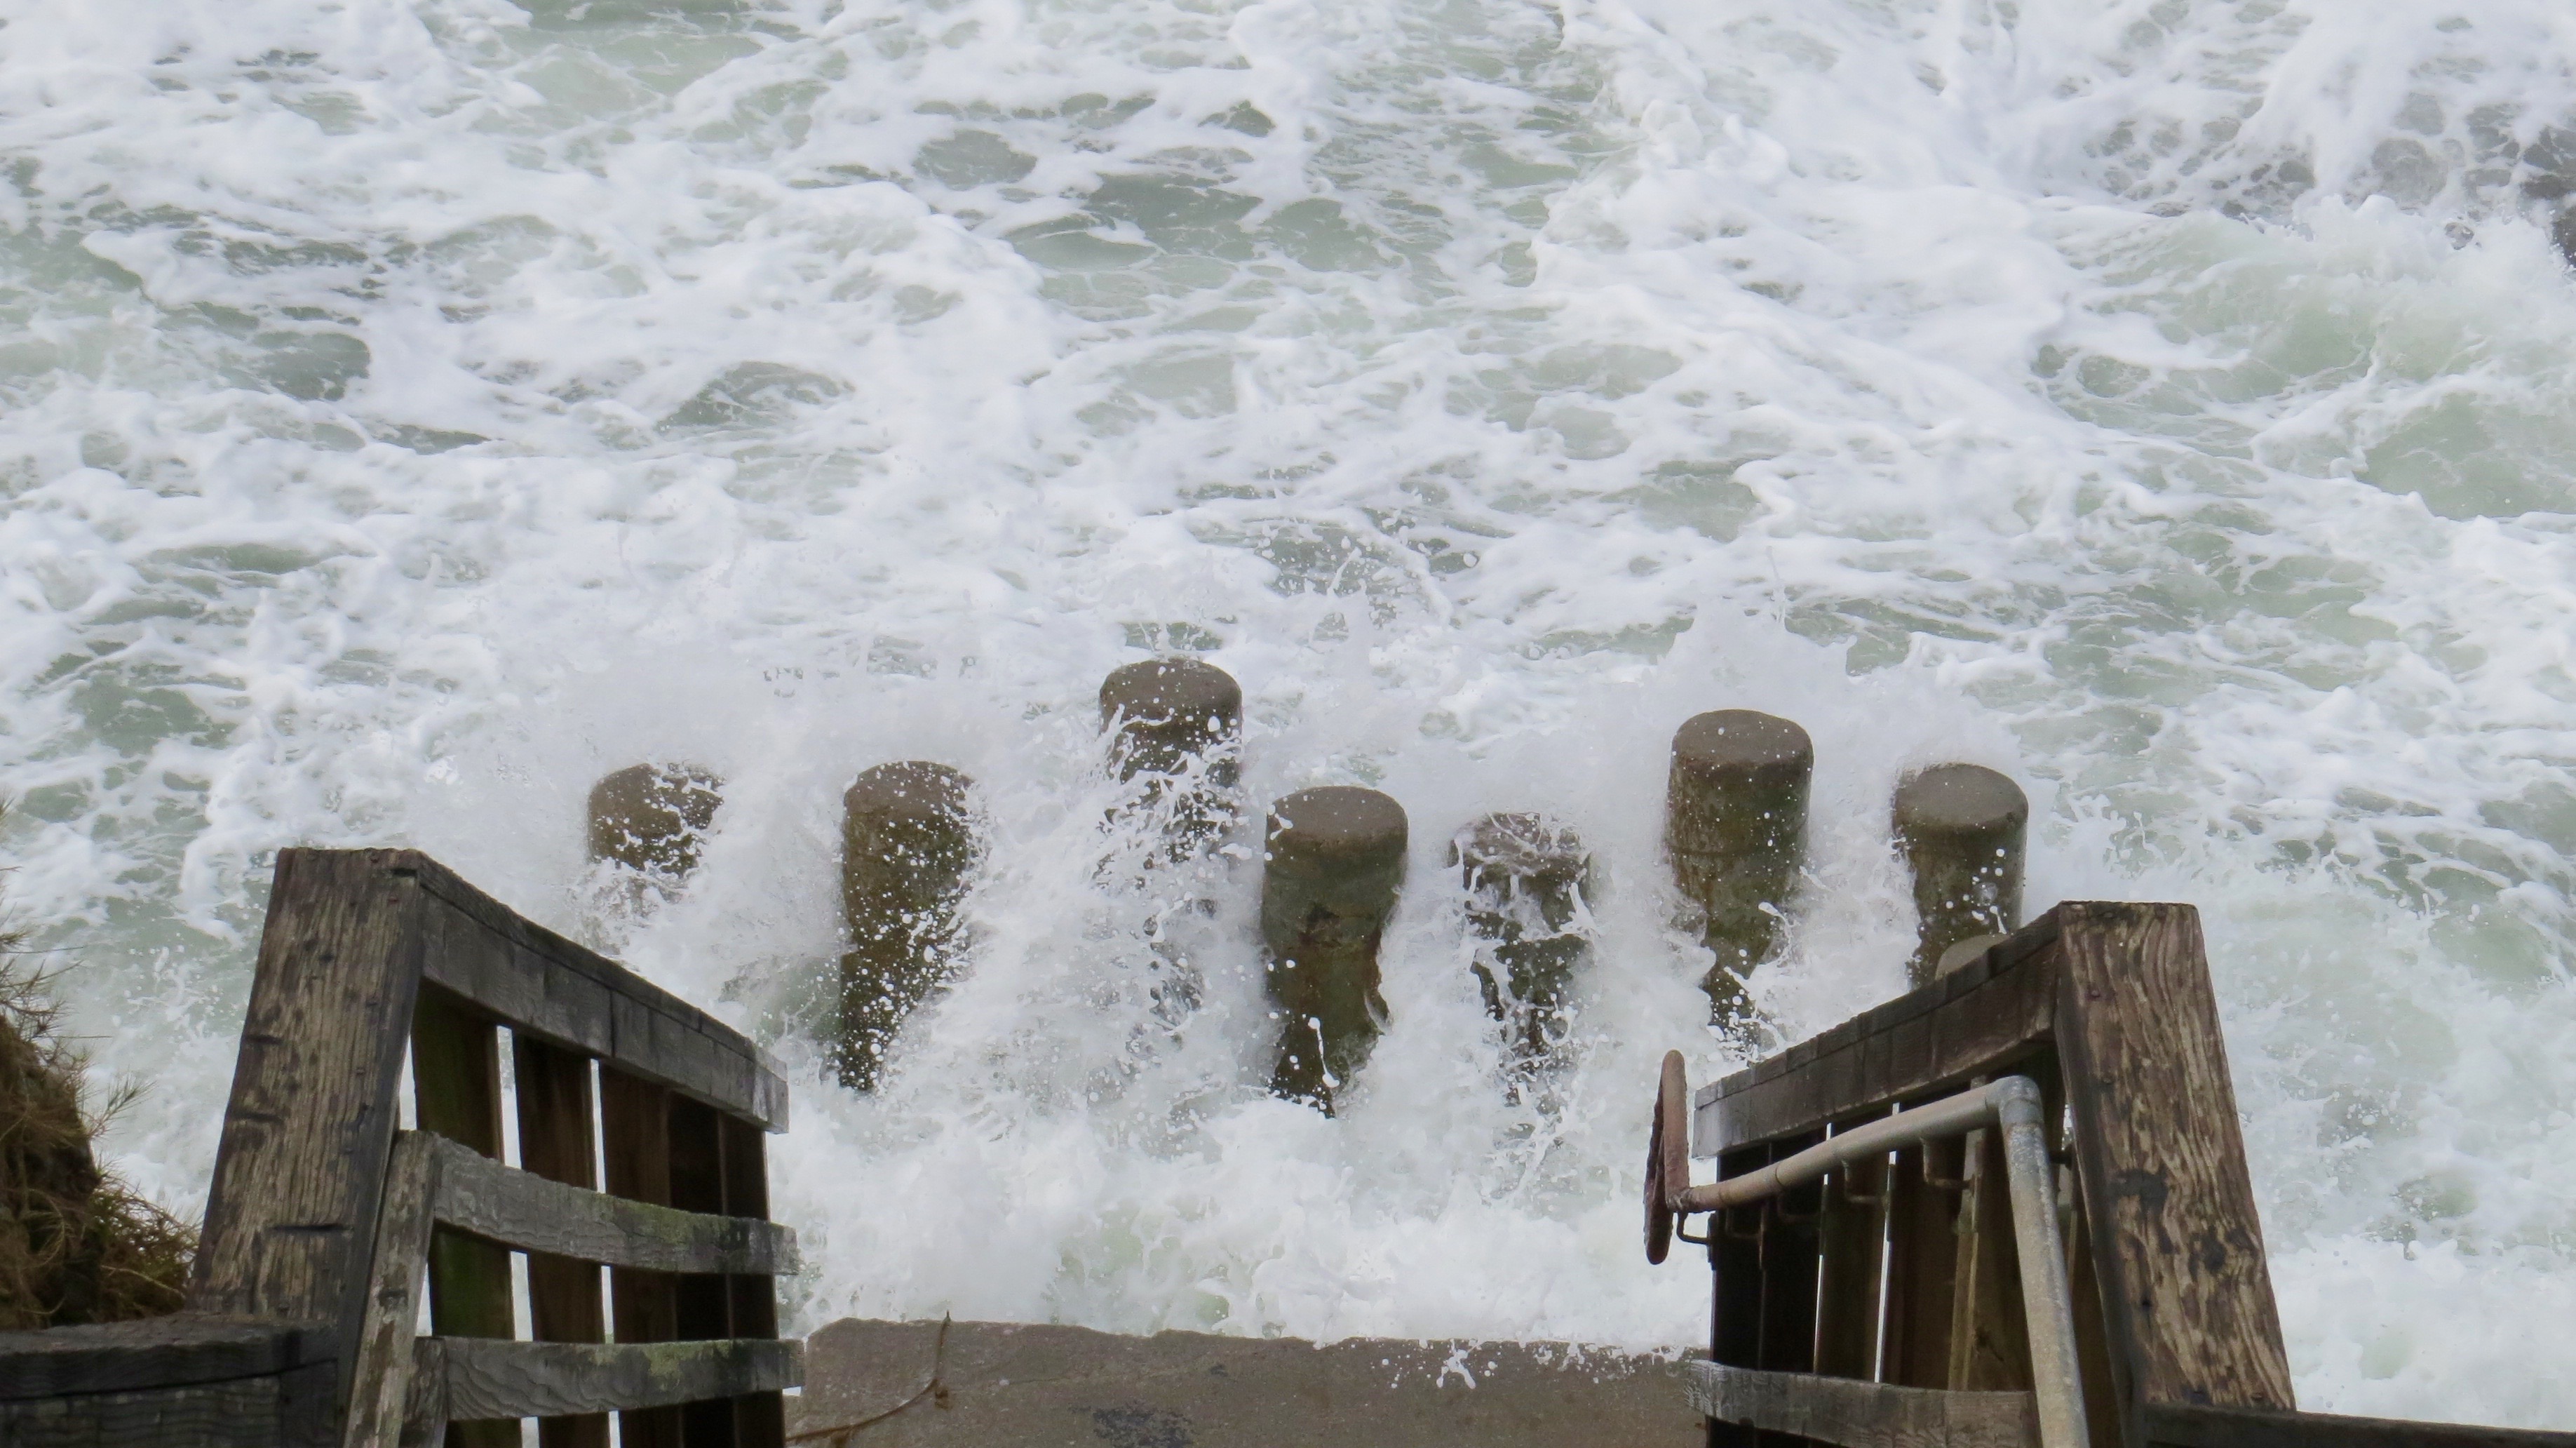 When it's low tide I usually walk down the stairs to the tidal pools. Not this week. Sometimes  the Pacific gets unruly. 